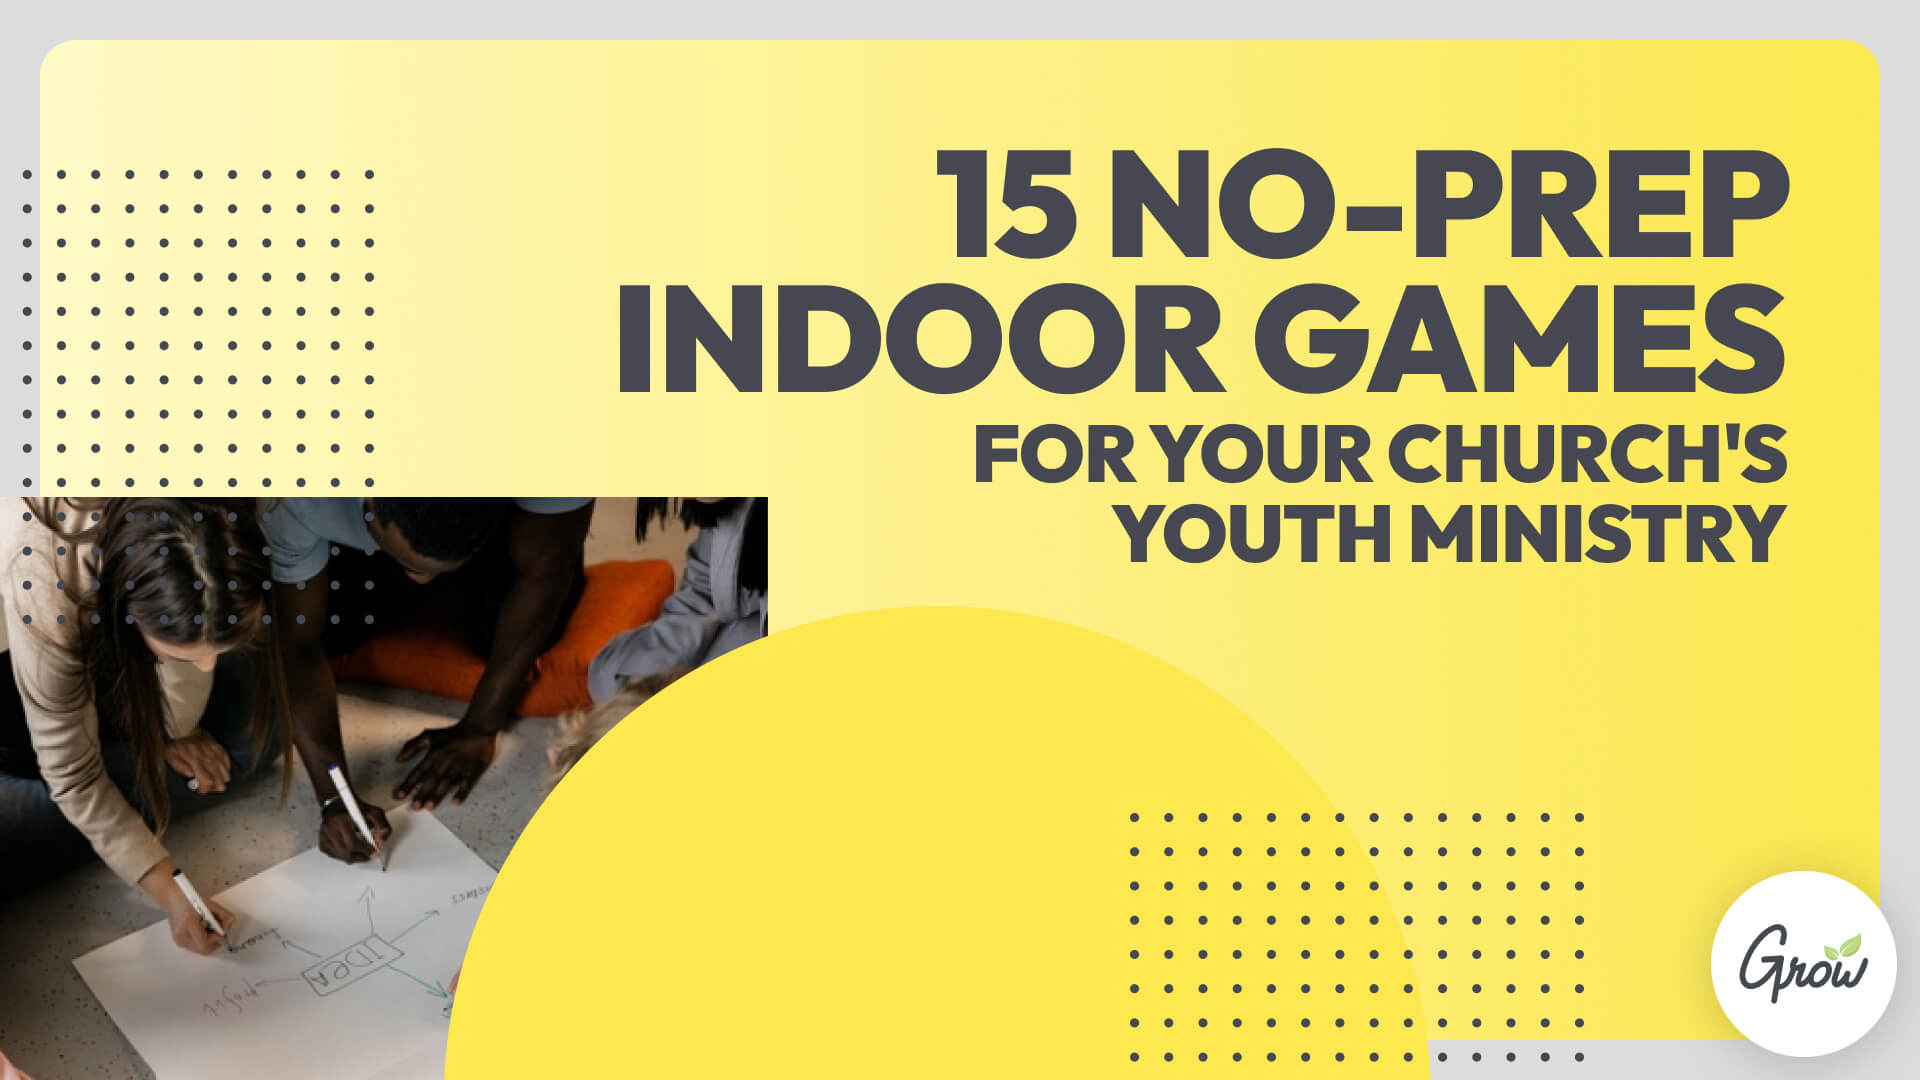 15 No-Prep Indoor Games for Your Church's Youth Ministry